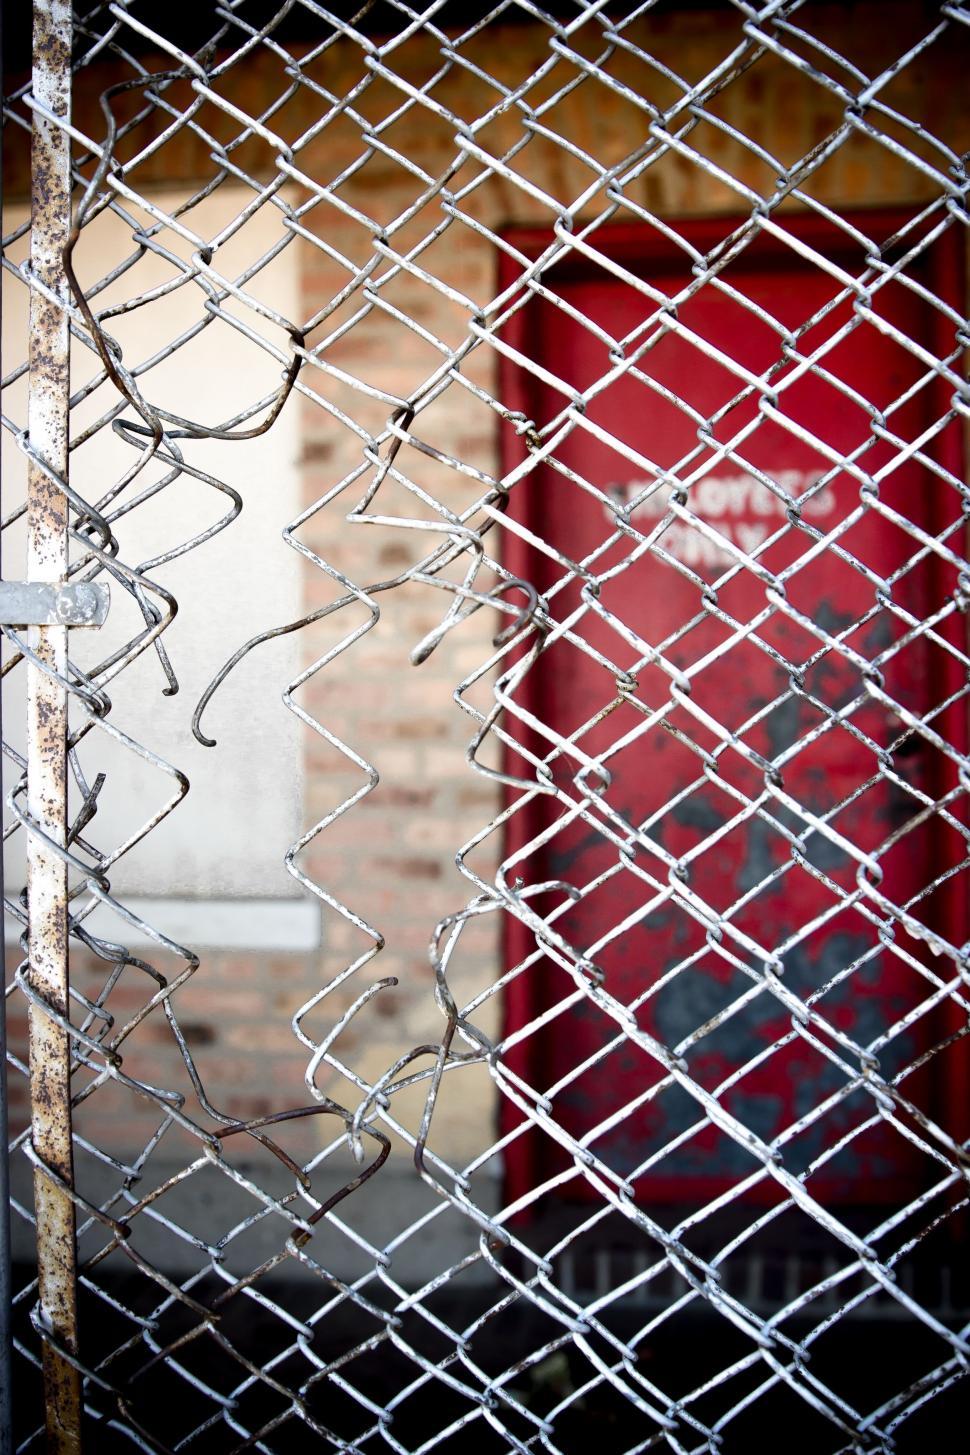 Free Image of Red Door Behind Chain Link Fence 